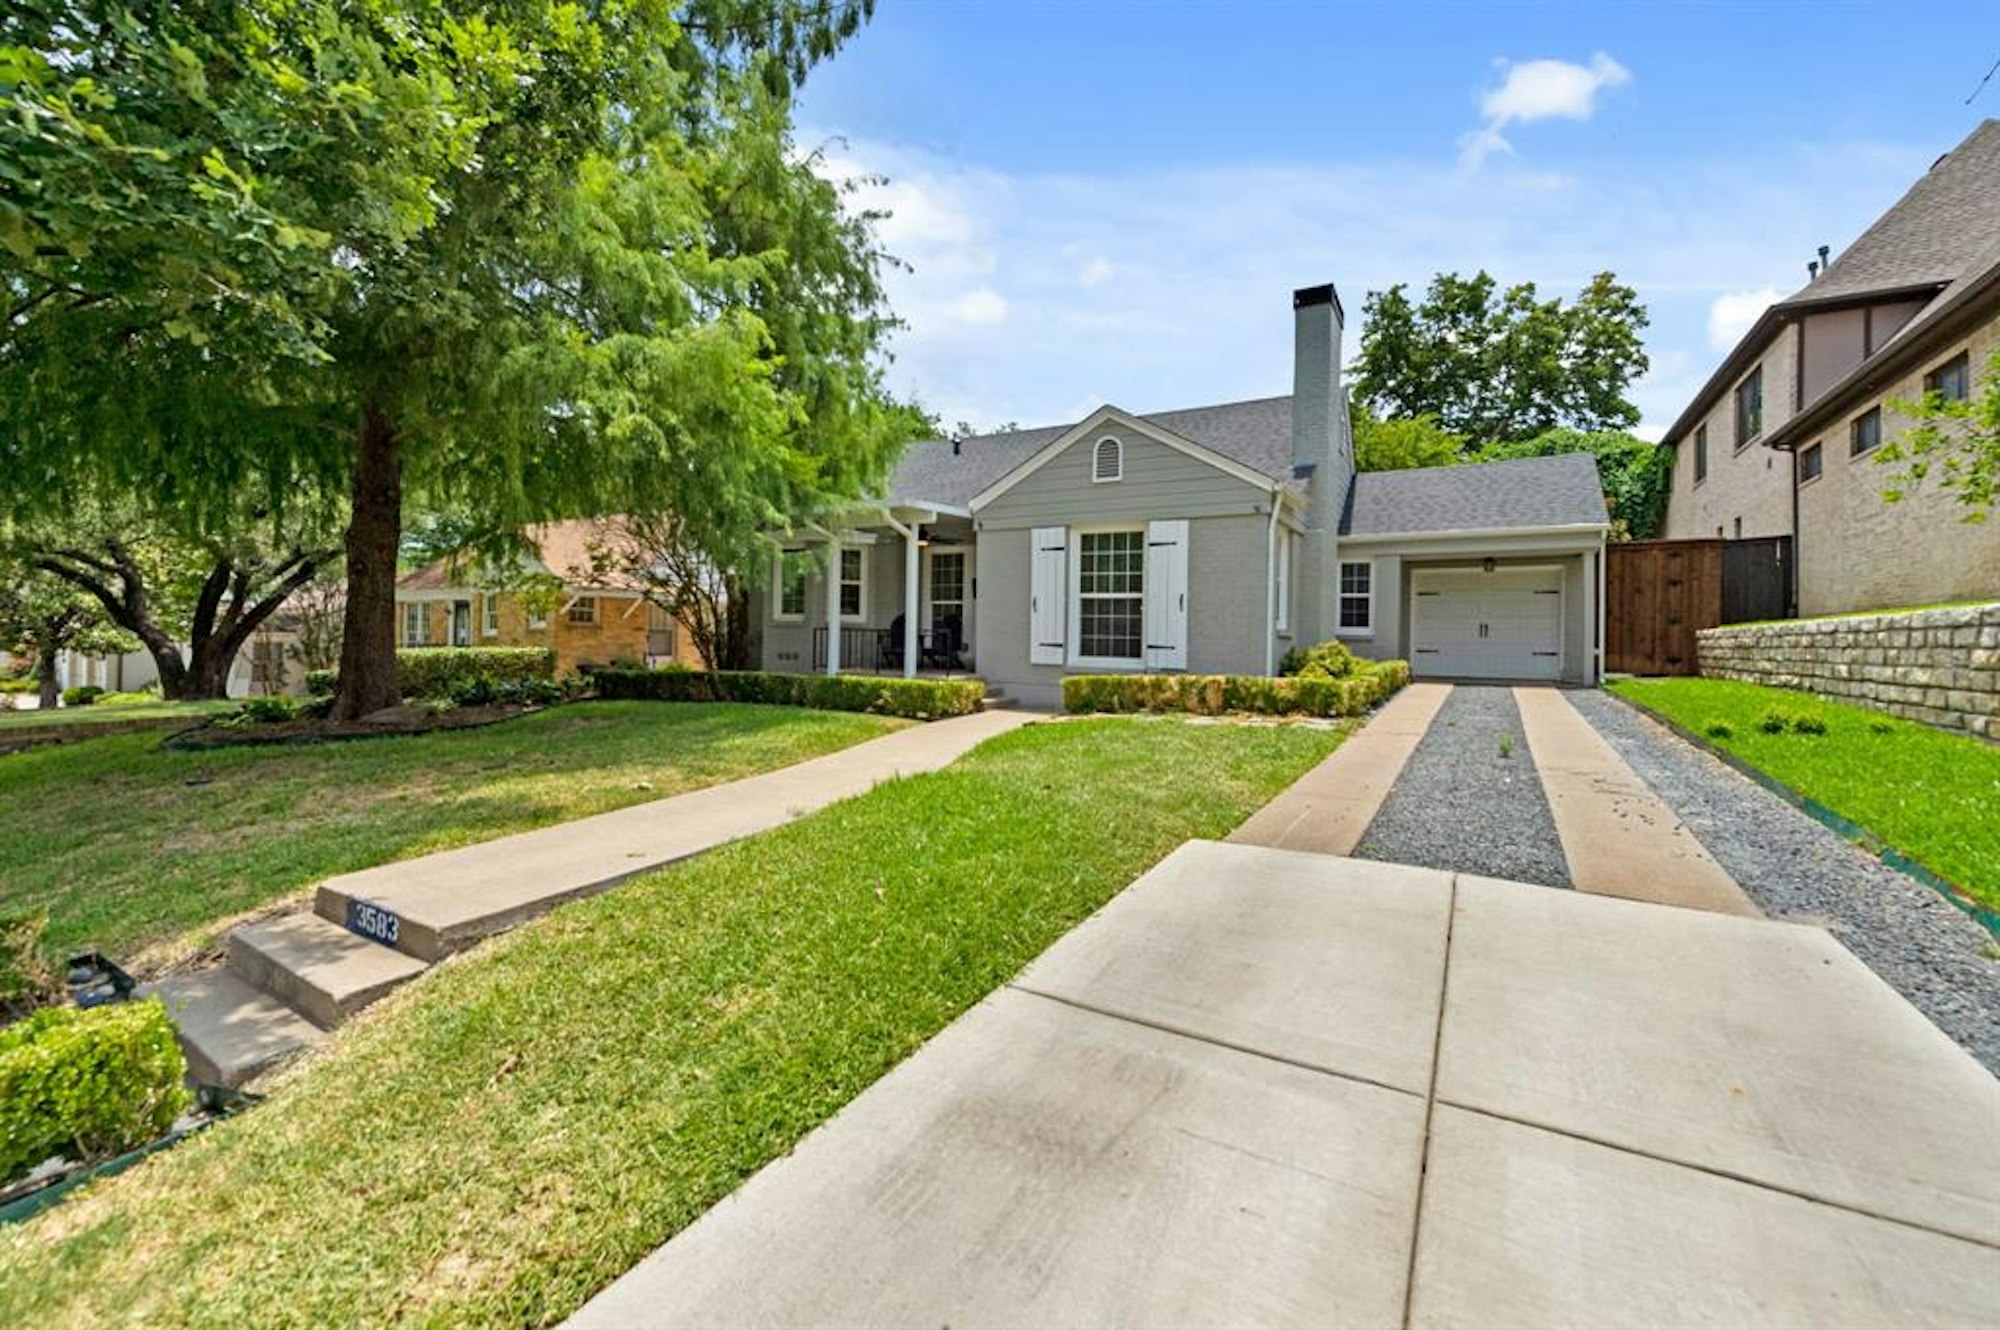 Photo 1 of 26 - 3583 W 4th St, Fort Worth, TX 76107